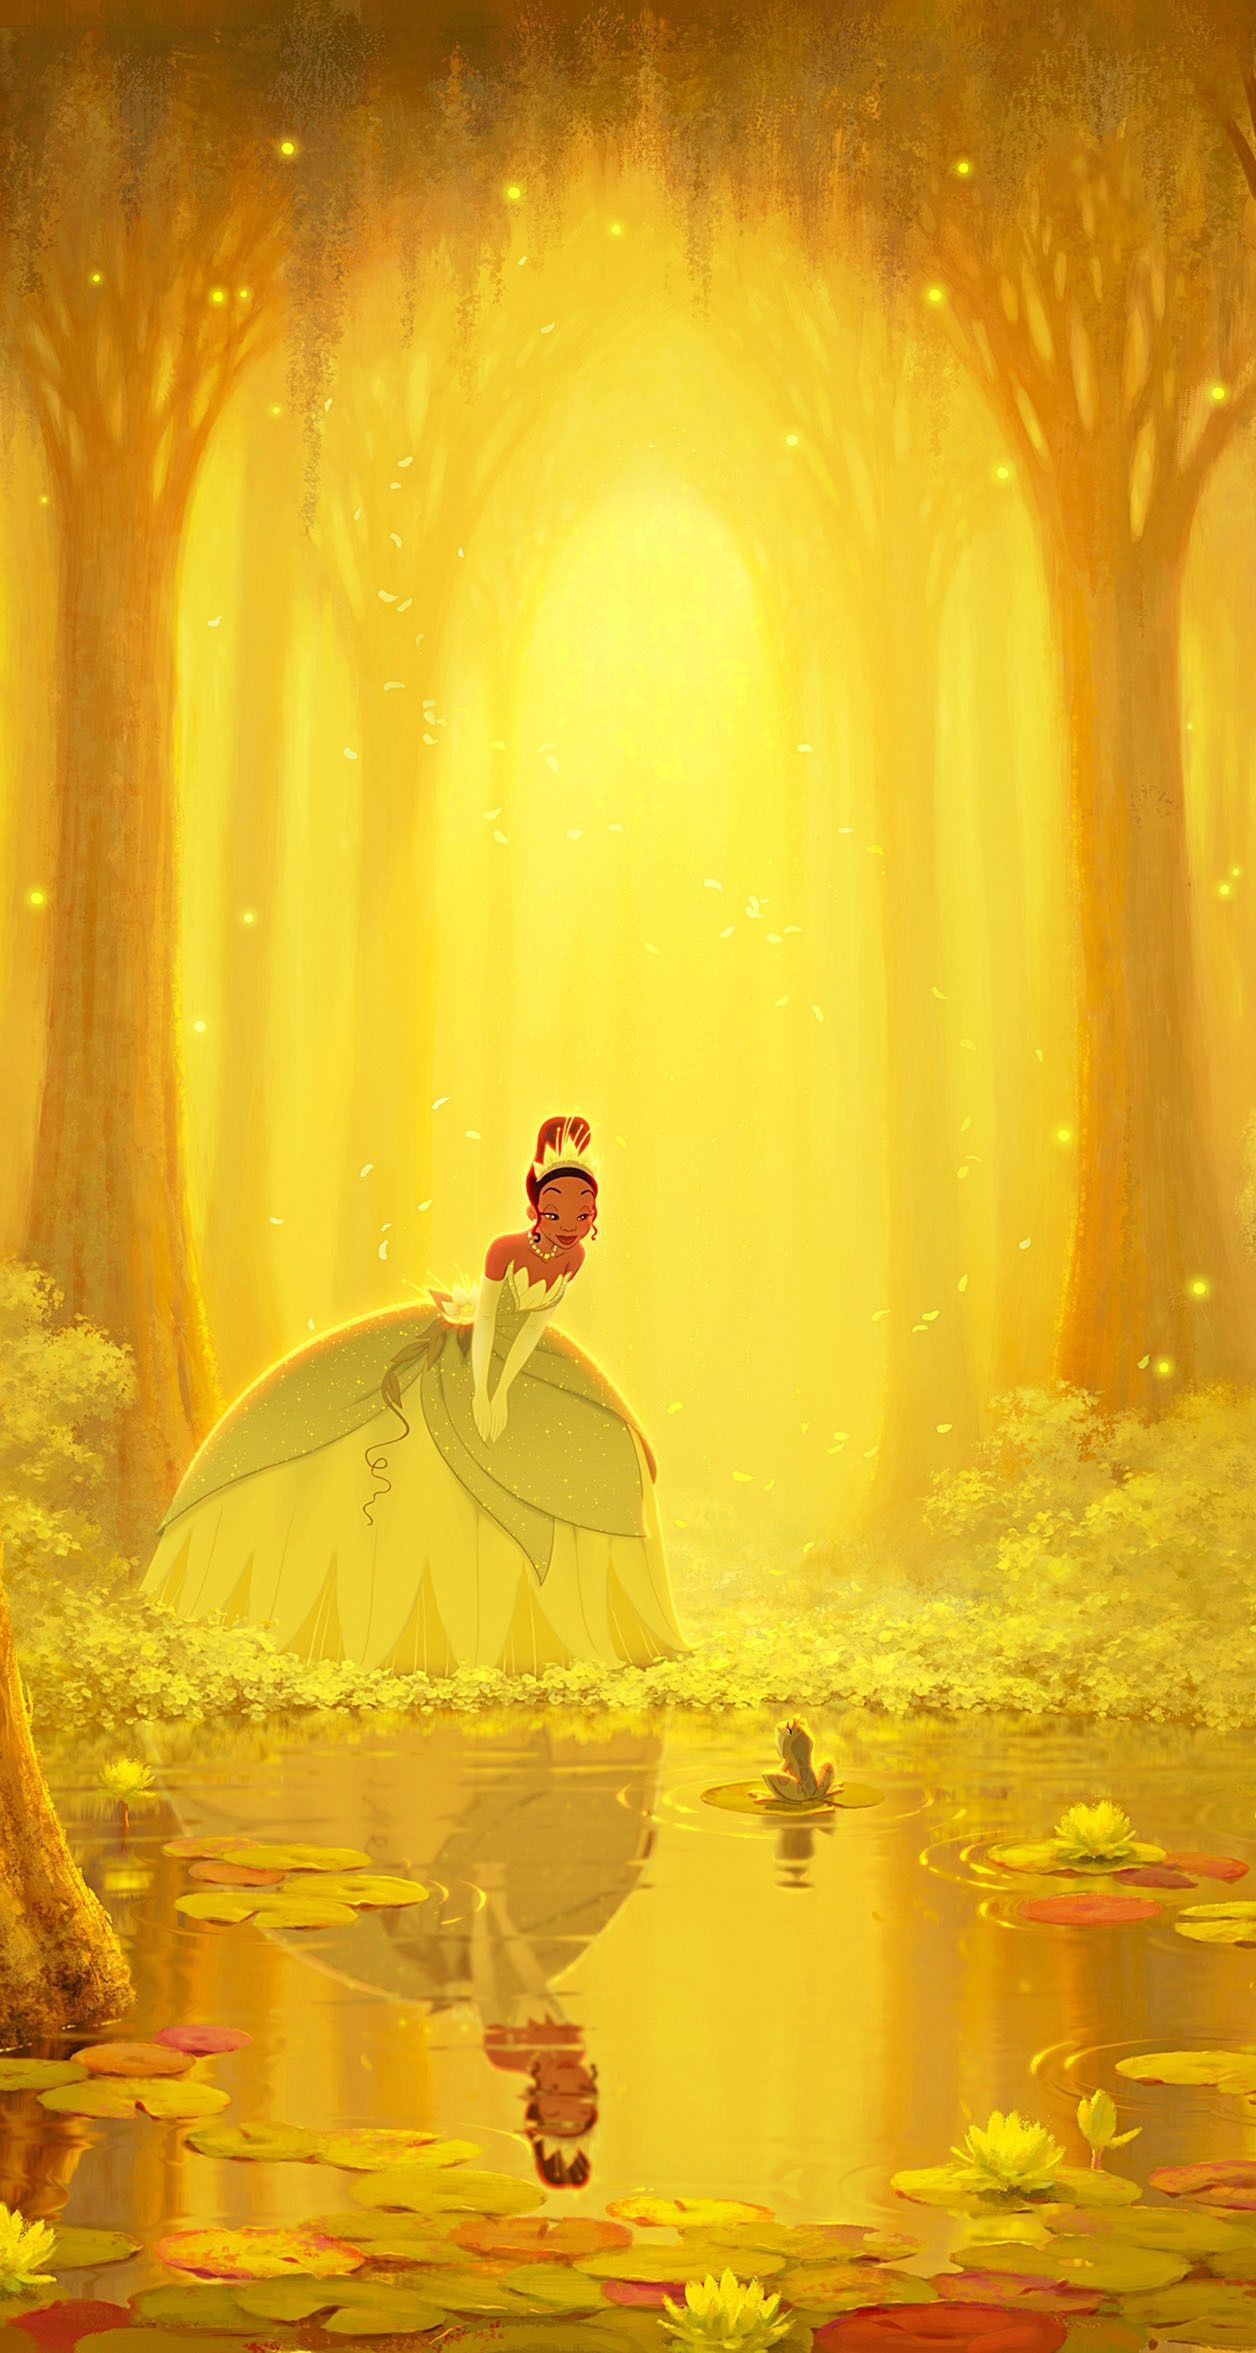 1256x2353 The Princess and the Frog Wallpaper | Disney wallpaper, Disney princess wallpaper, Disney background